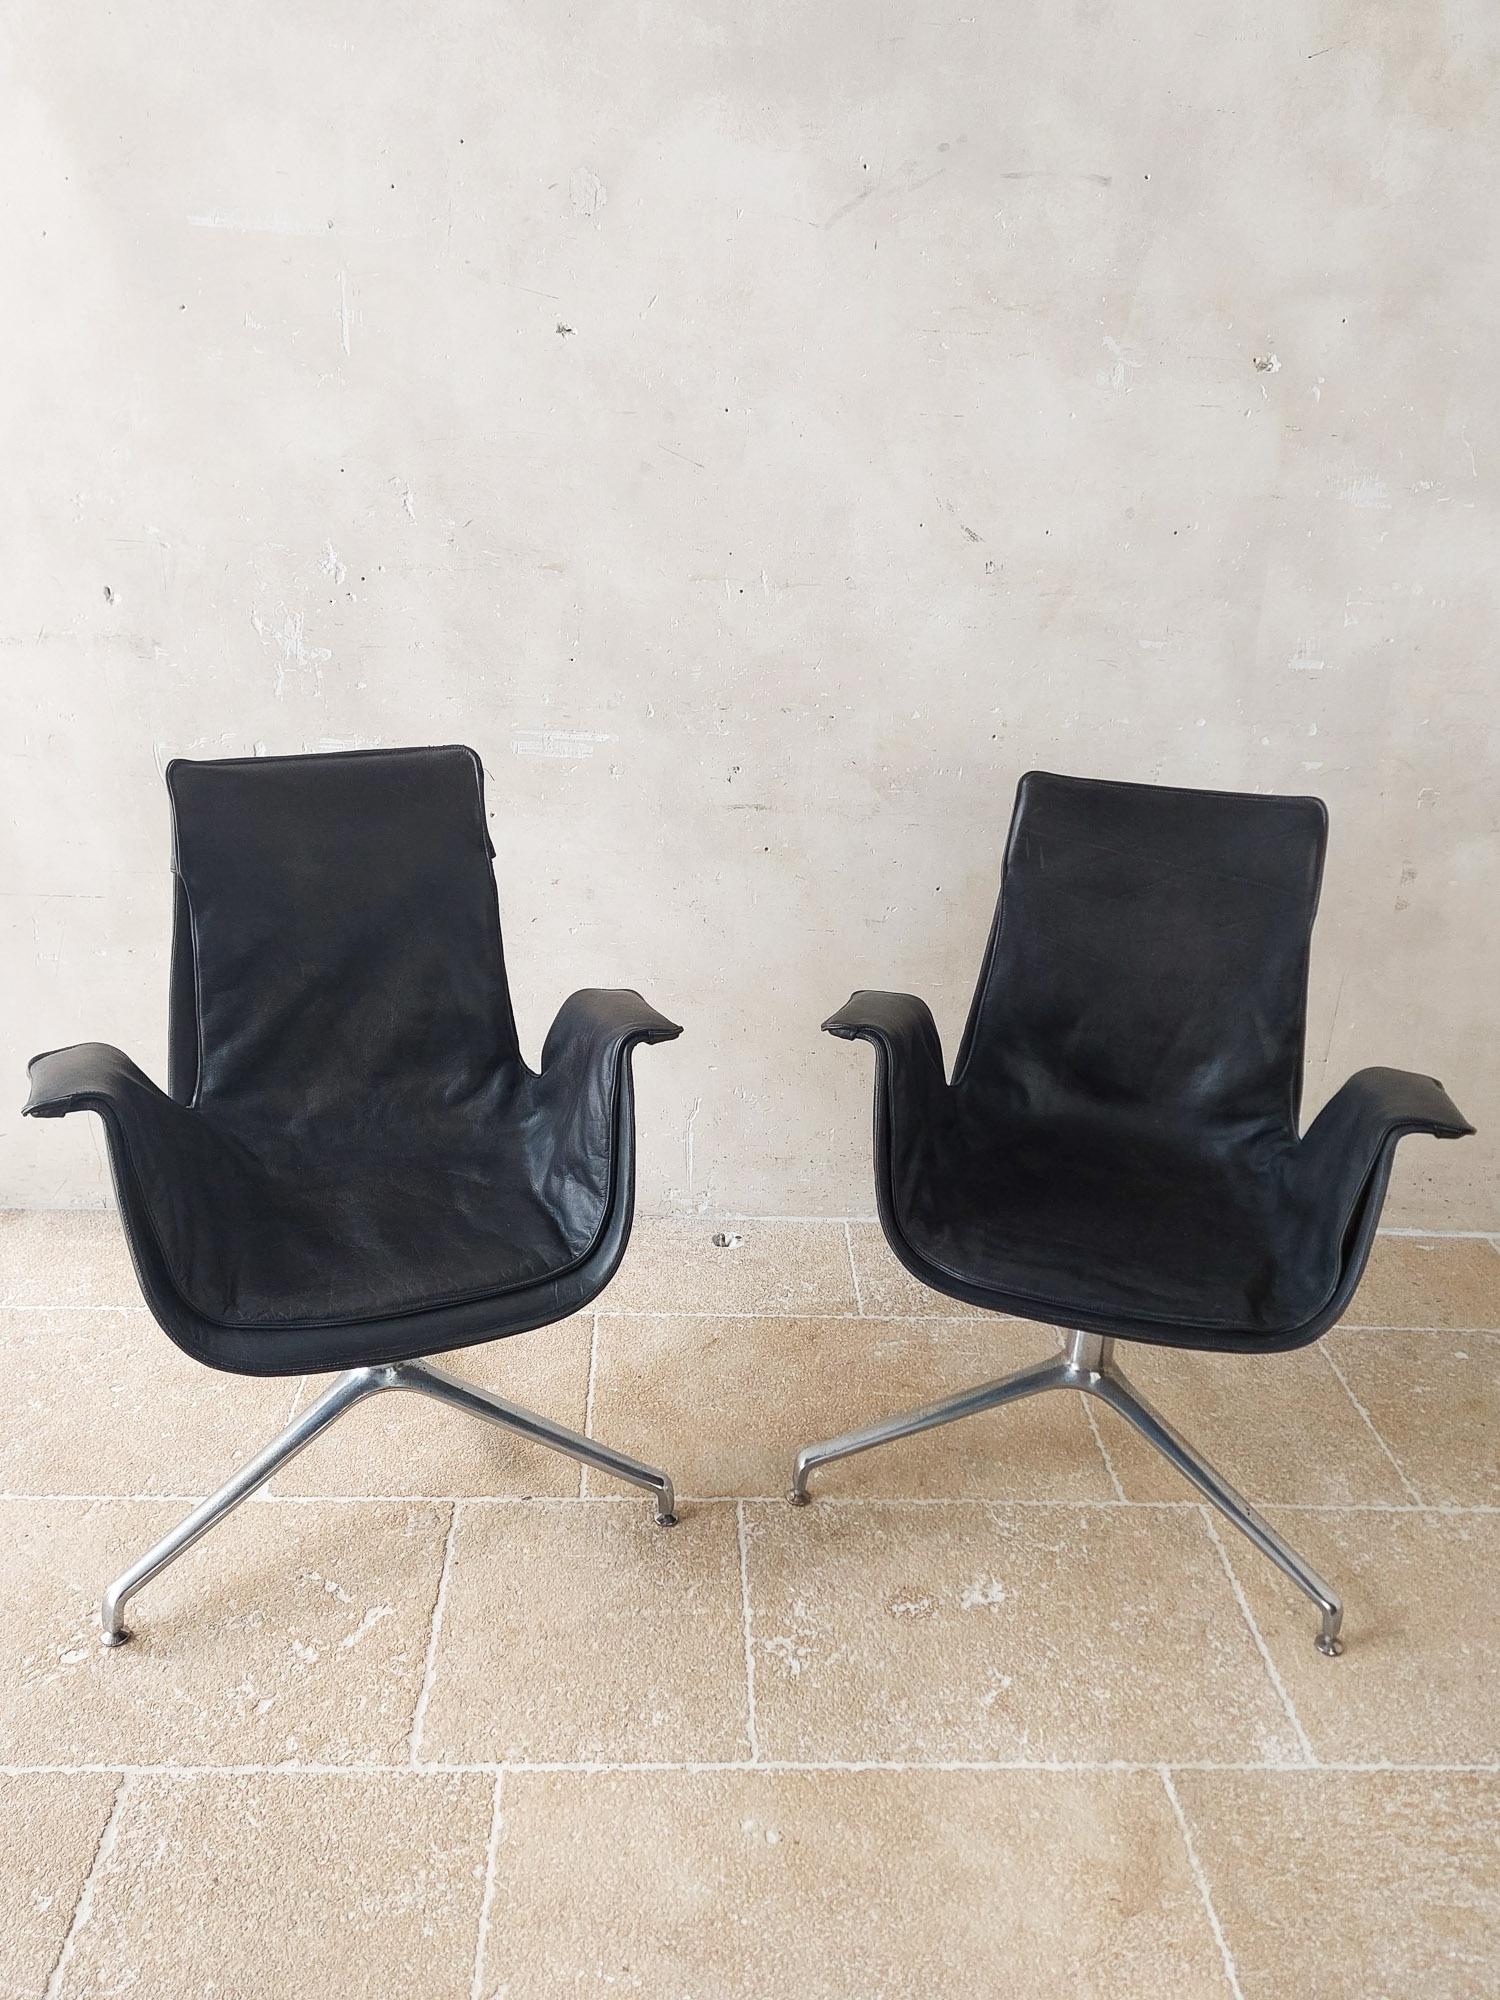 Set of 2 vintage designer chairs in black leather. These midcentury armchairs were designed by Preben Fabricius & Jorgen Kastholm for Kill International, Denmark, 1960s. Model FK6727, Also called the 'bird chairs'.

Beautiful lounge chairs, can